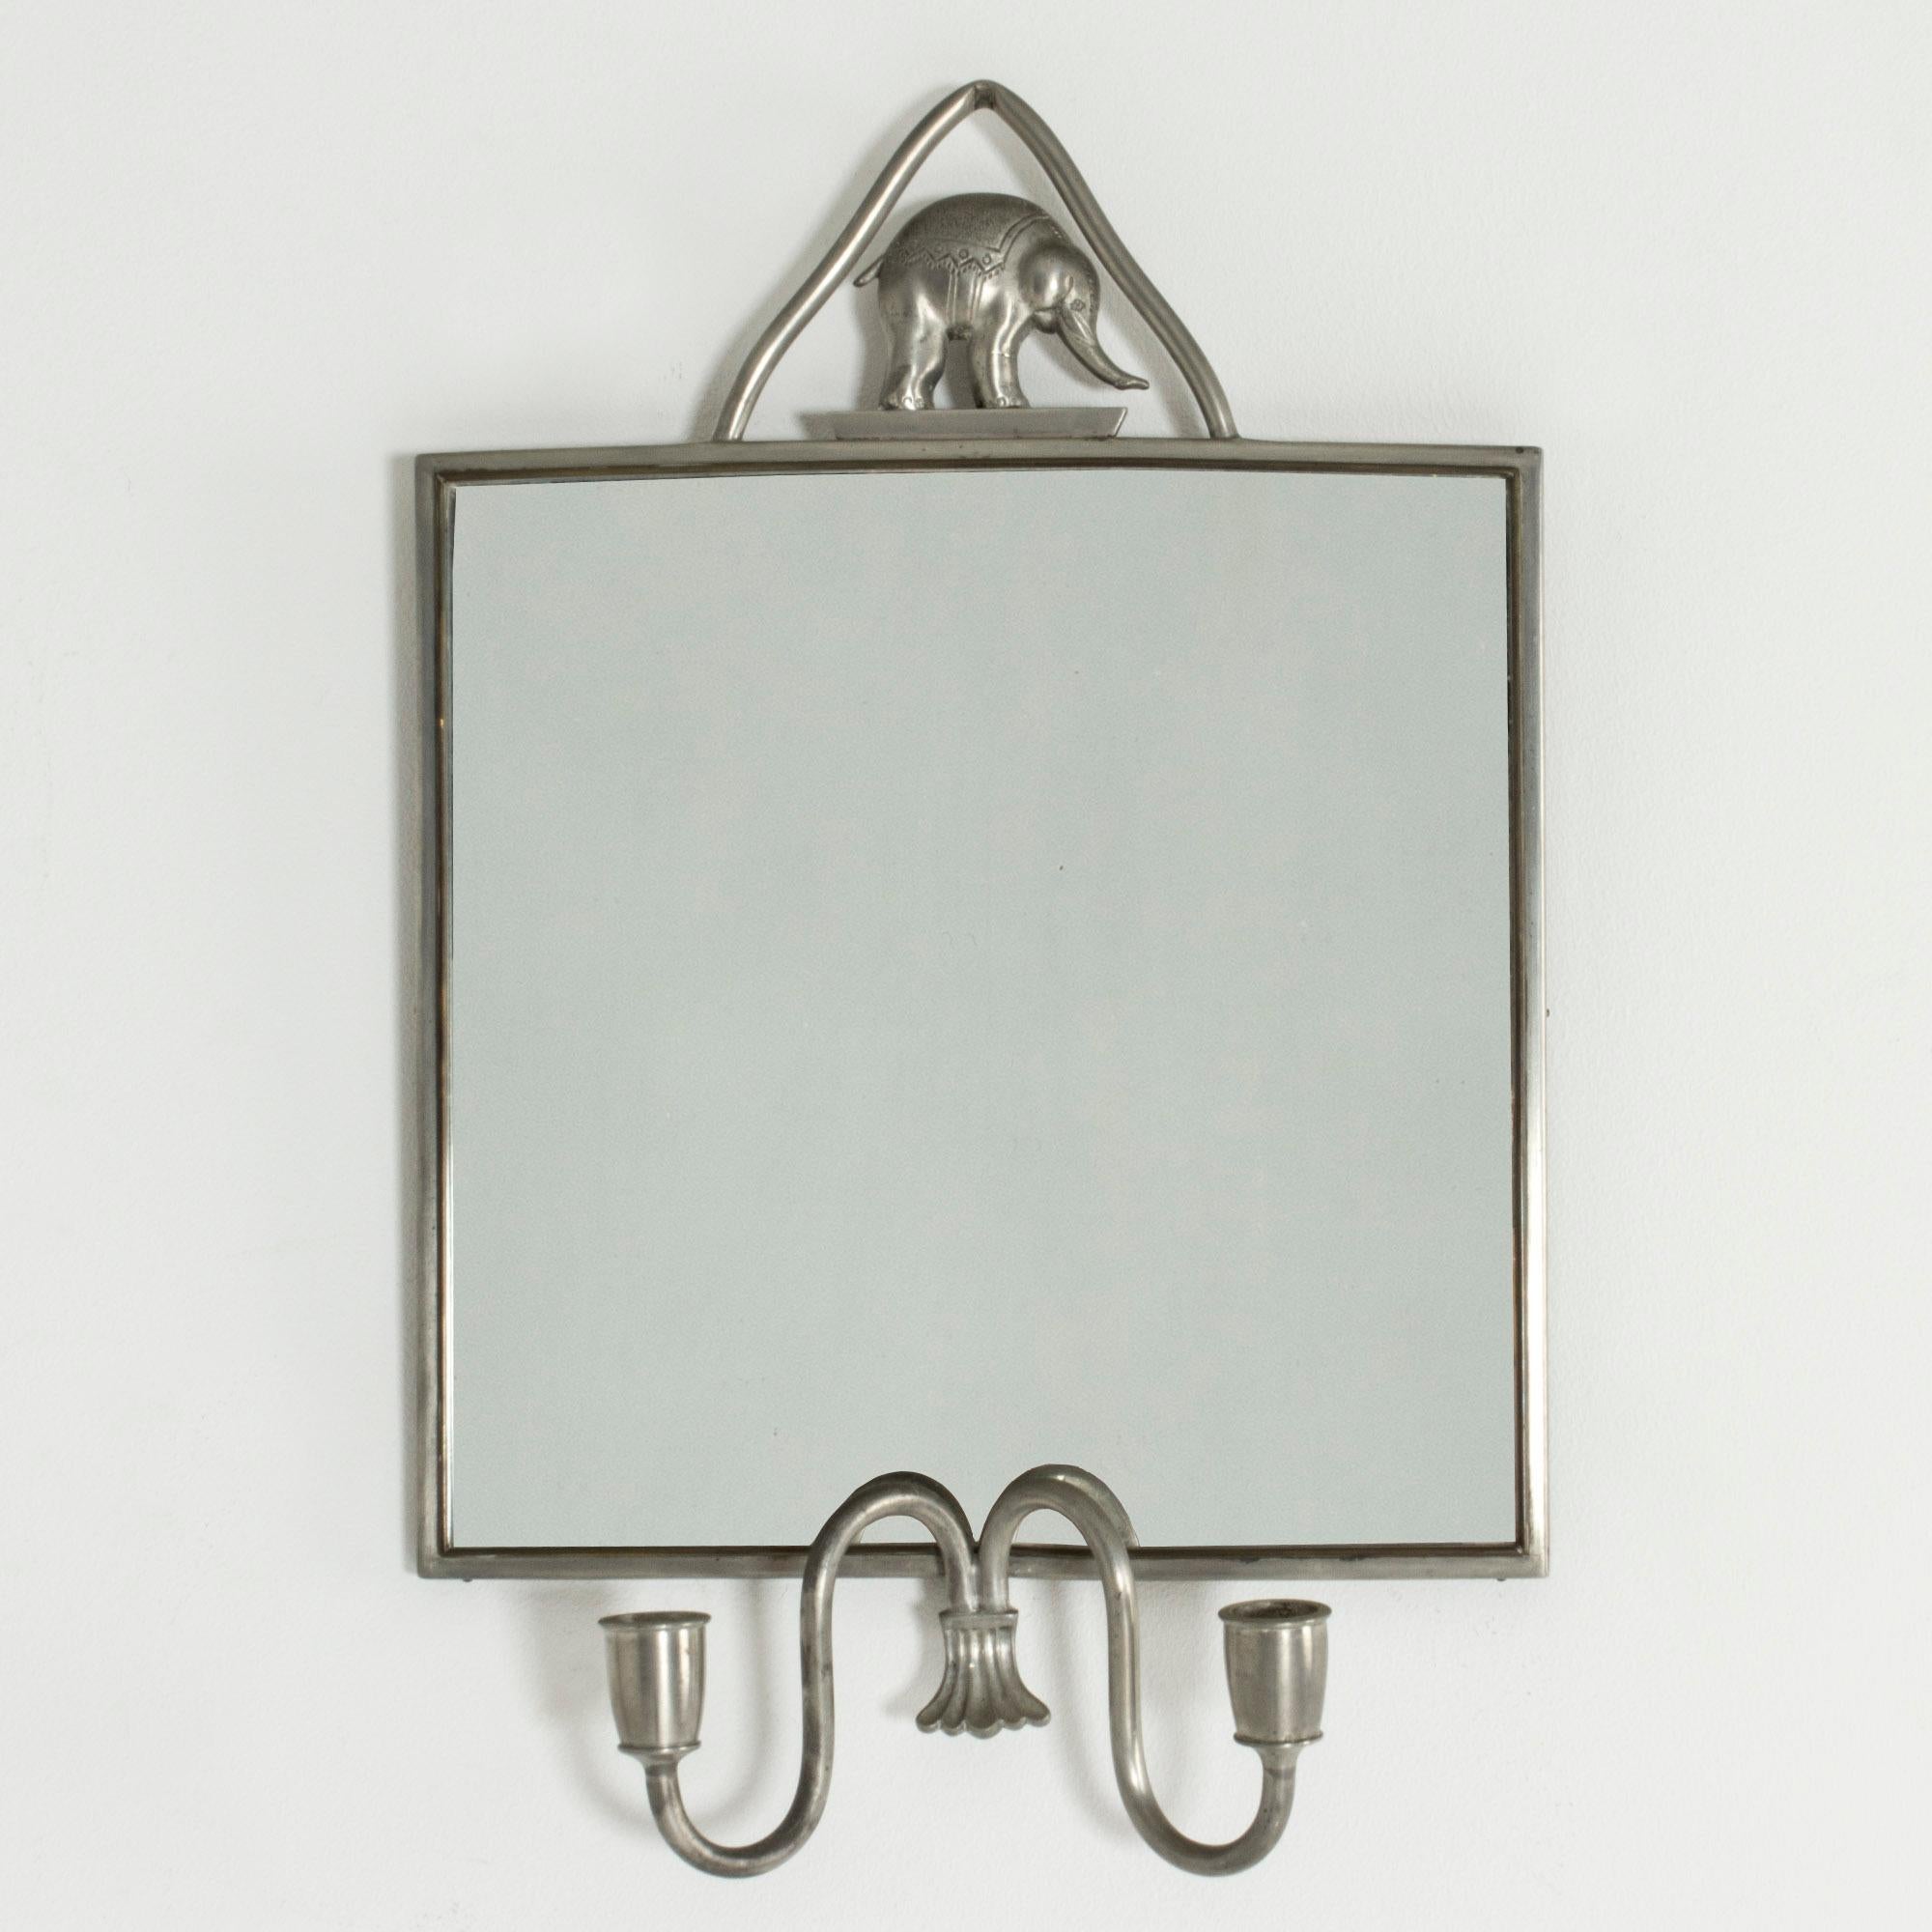 Adorable pewter wall mirror by Estrid Ericson, adorned with an elephant on top. Candleholders for two regular candles.